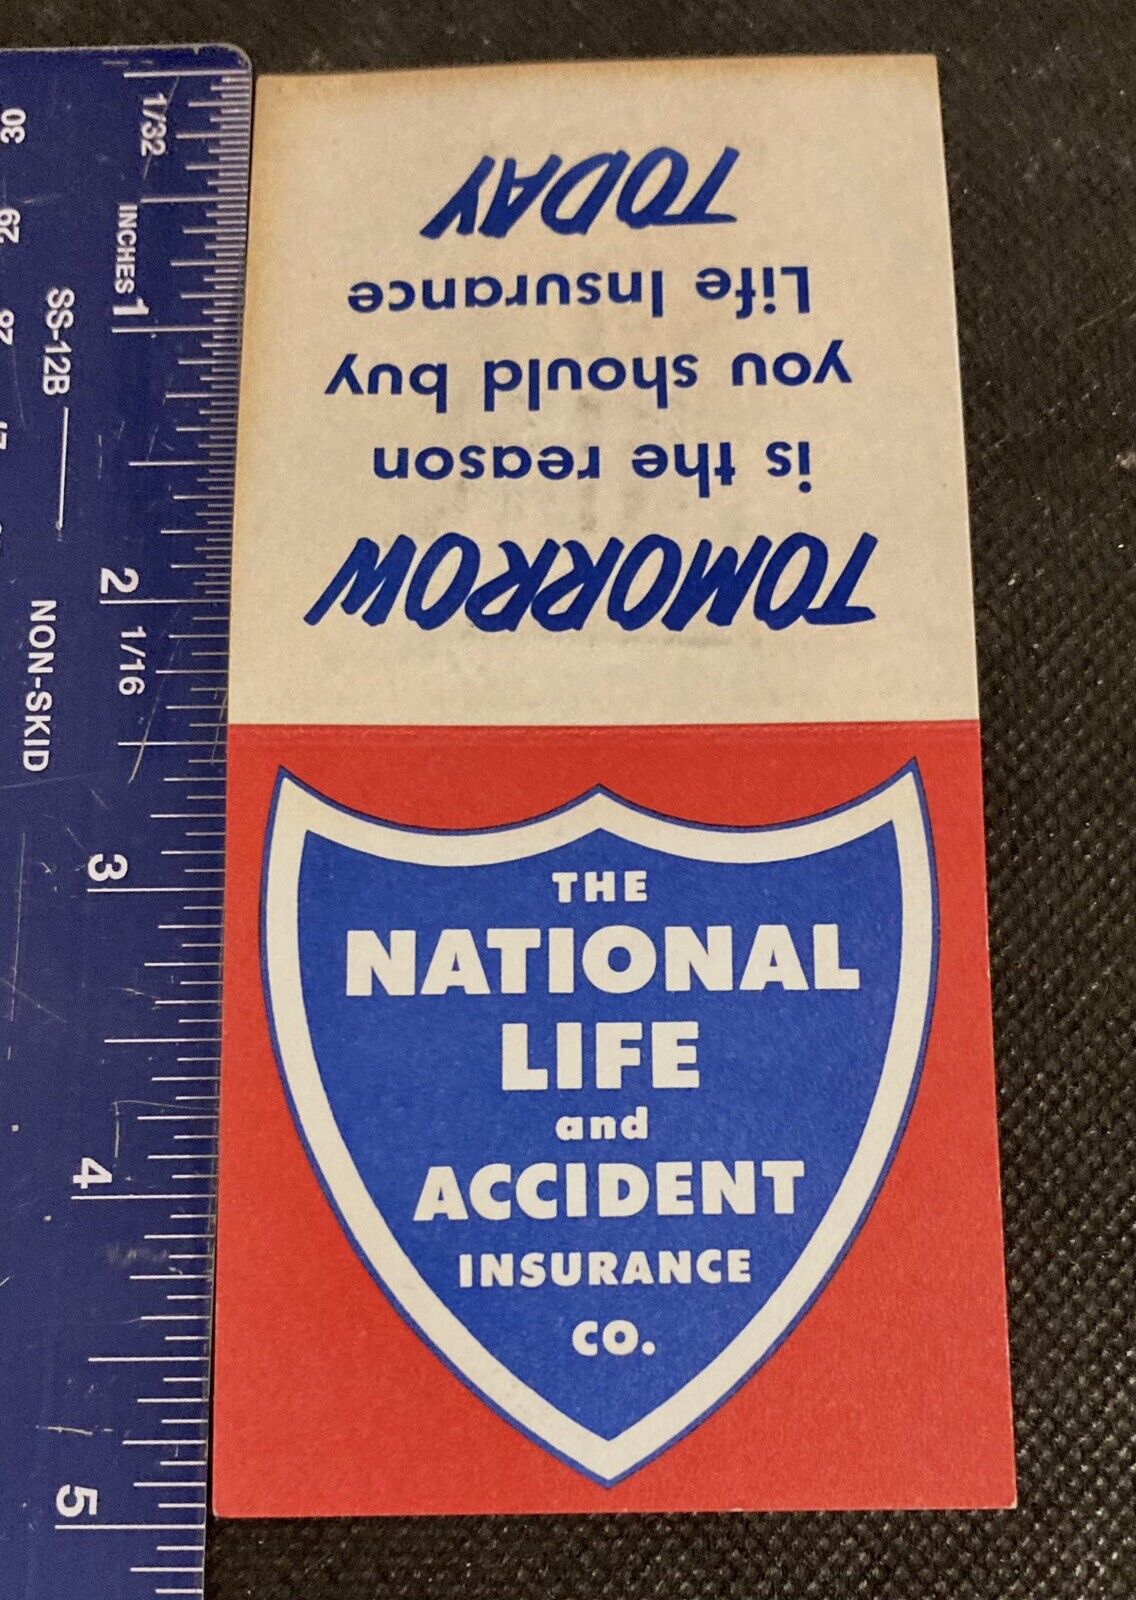 The National Life and Accident Insurance Co Advertising Card With Needles